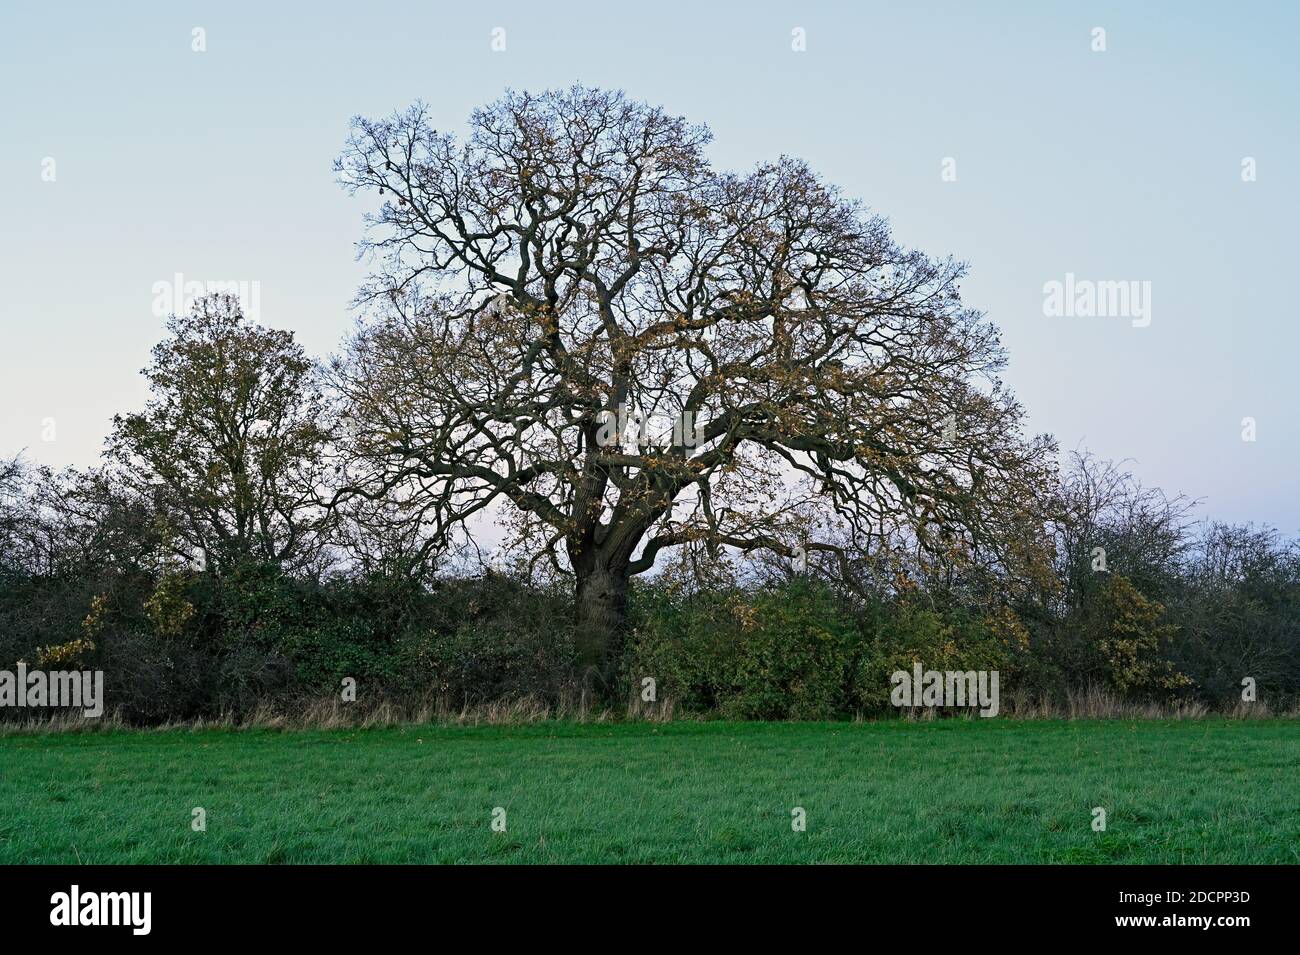 English Oak tree (Quercus robur) as seen in autumn (November) at Wickford,  Essex, UK. Stock Photo